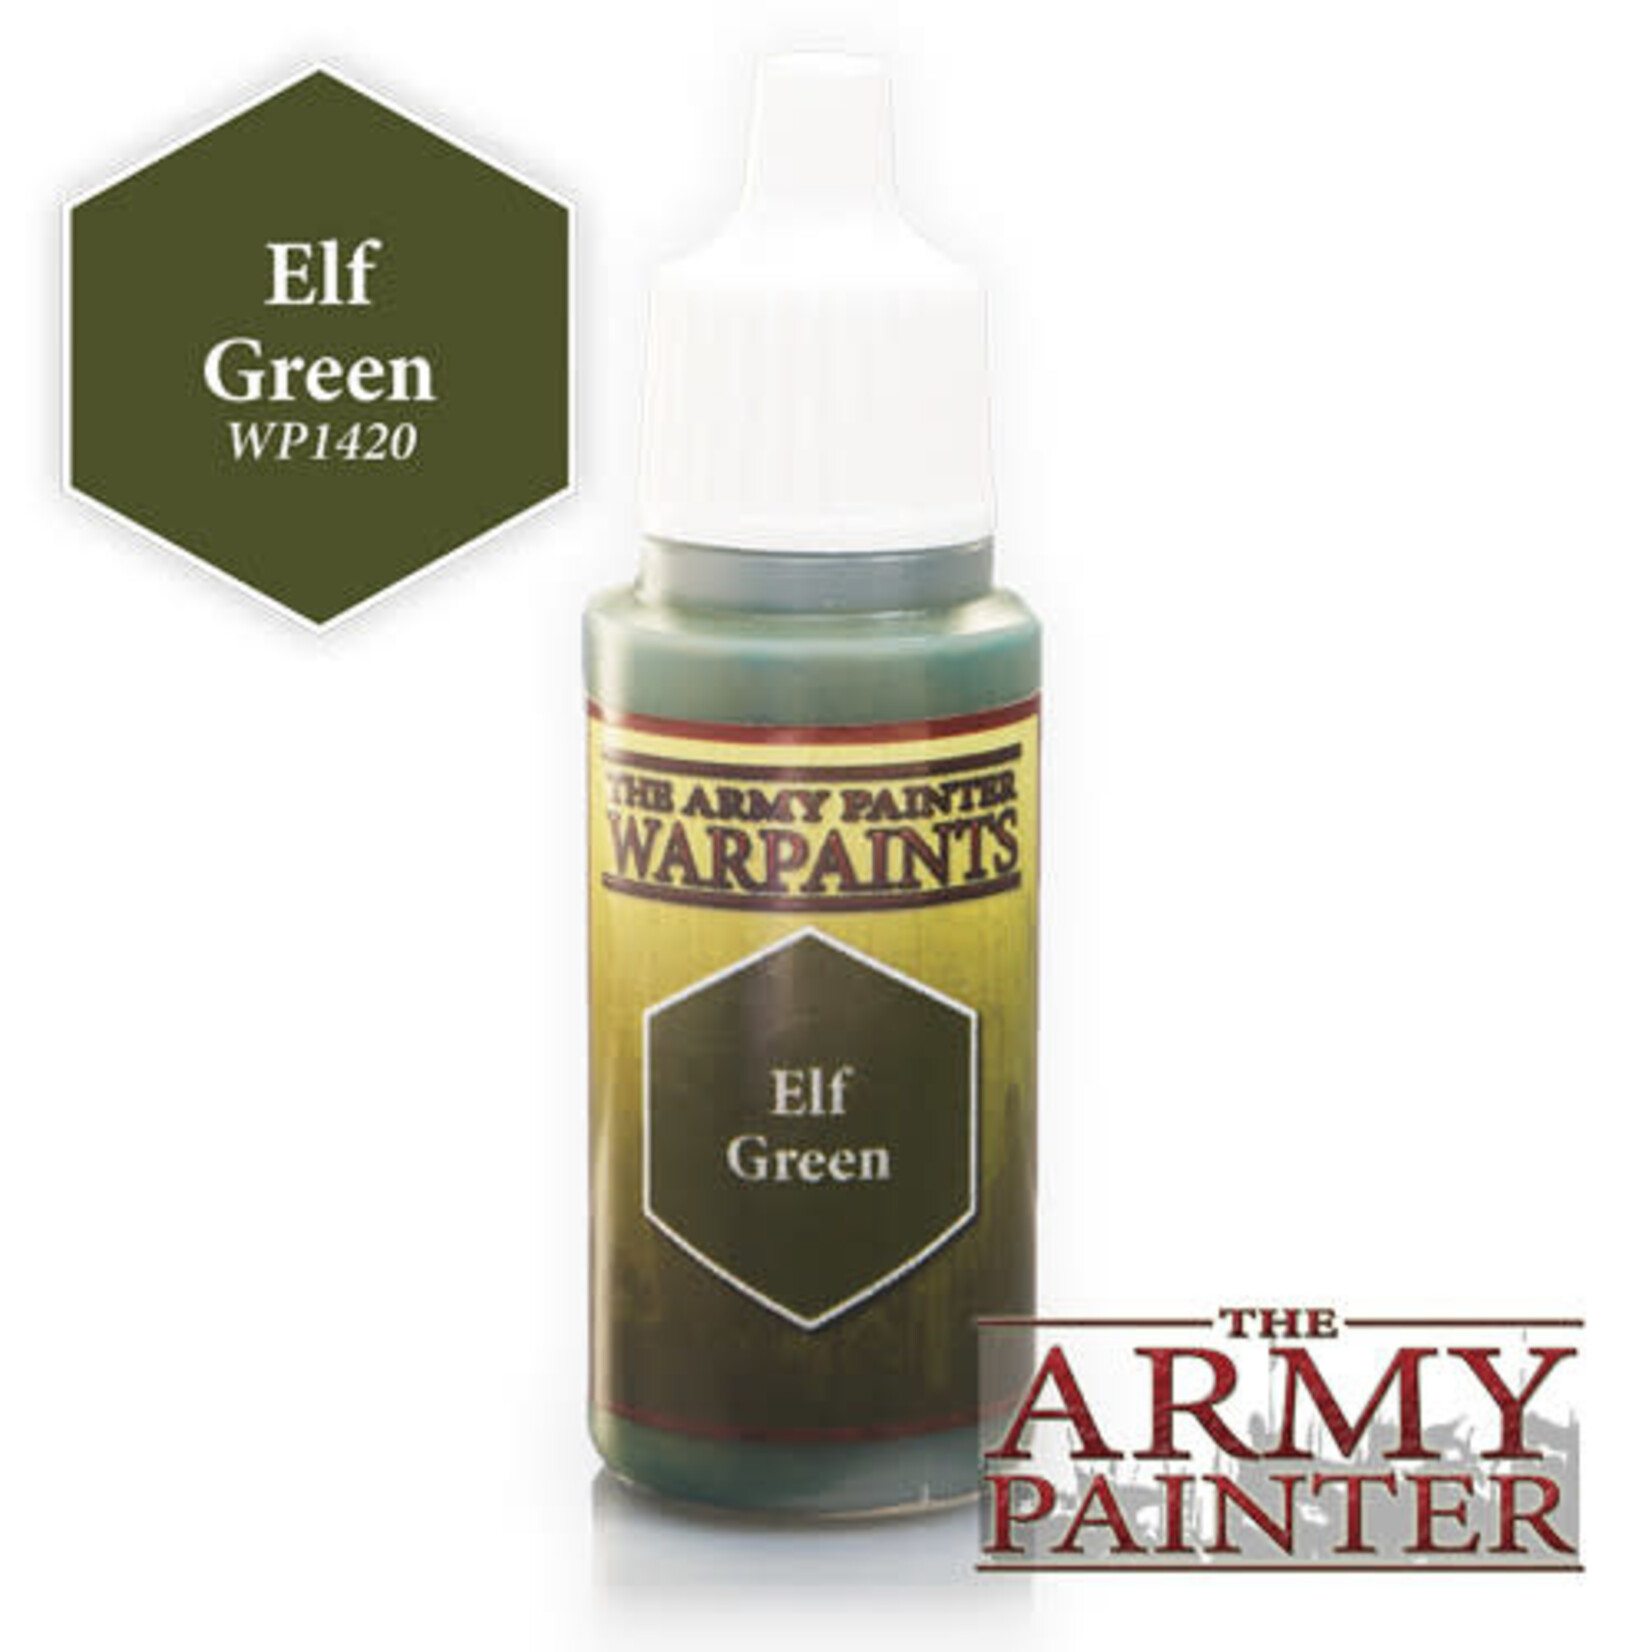 The Army Painter Warpaints: Elf Green 18ml